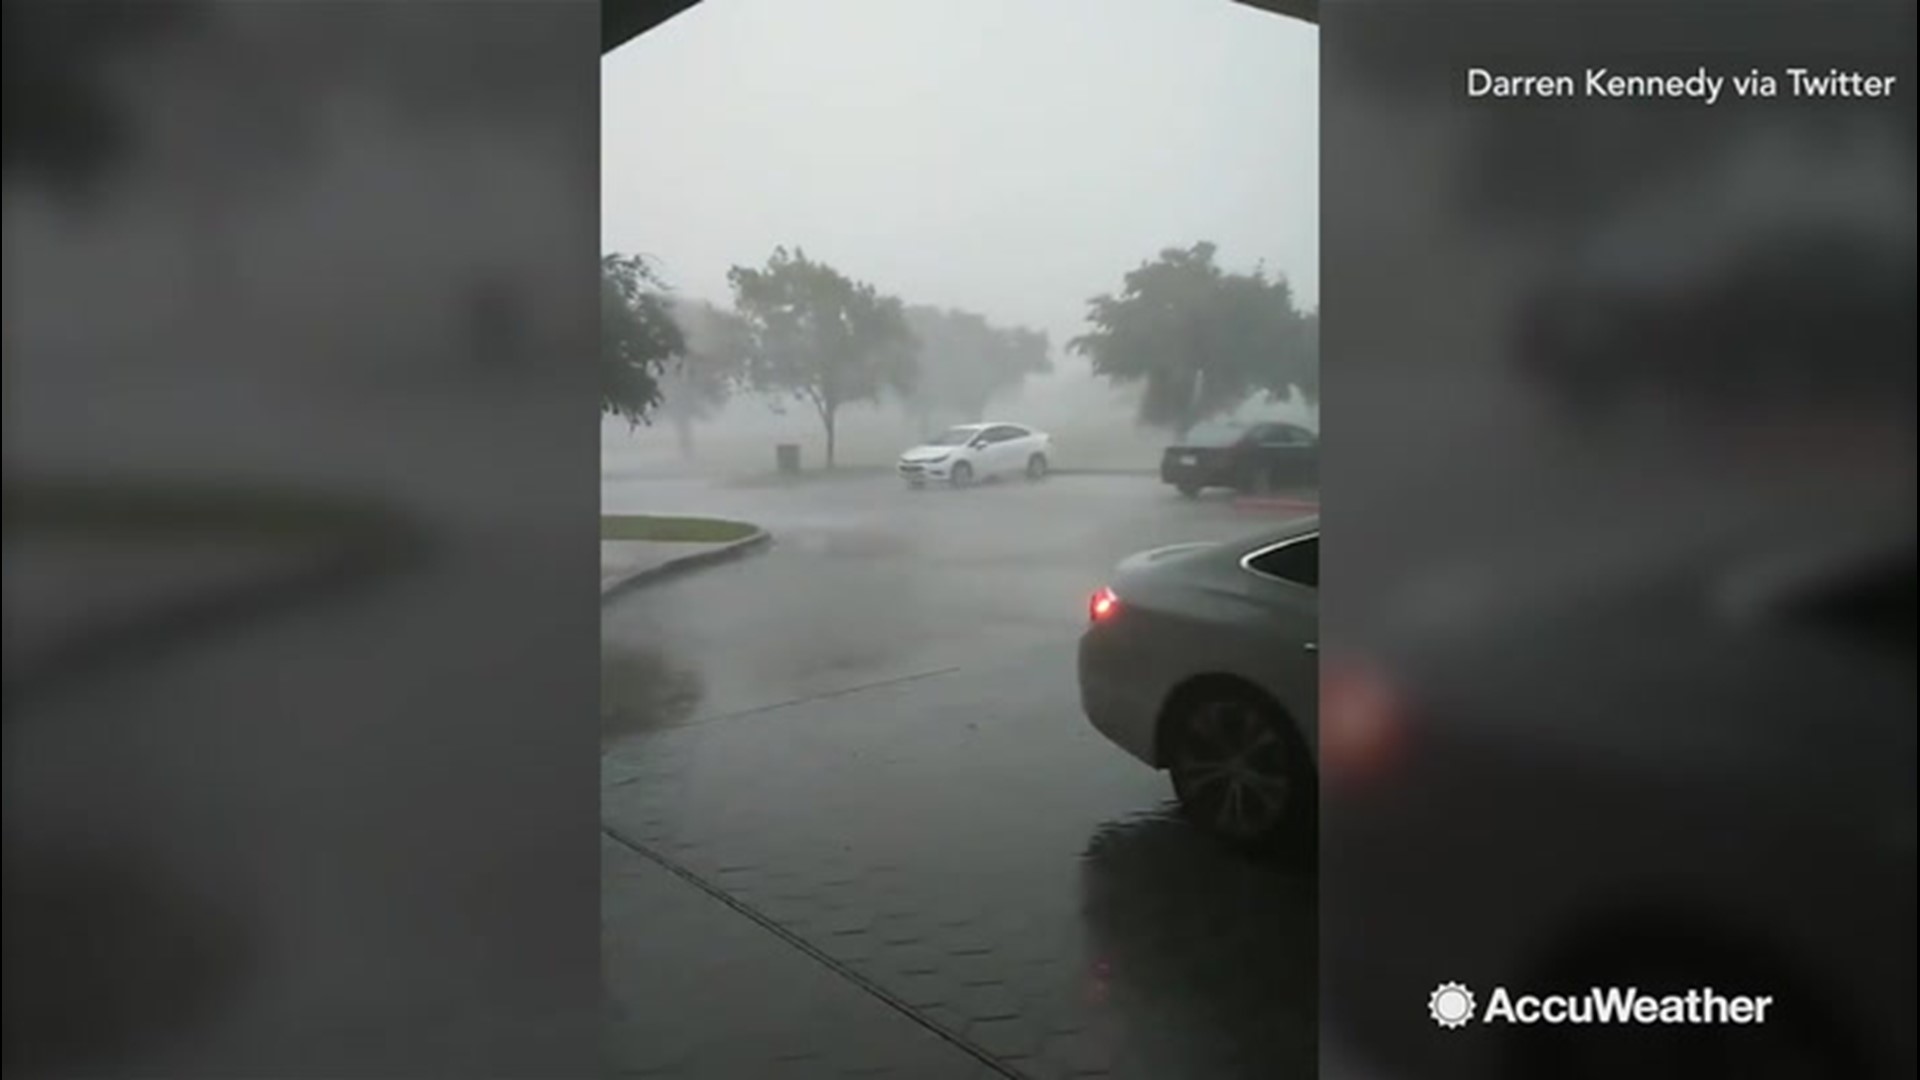 Severe weather hit the area around Dallas, Texas, with incredible fury on June, 16. Rain came down so fast, that this home lighting system was tricked into thinking it was night.